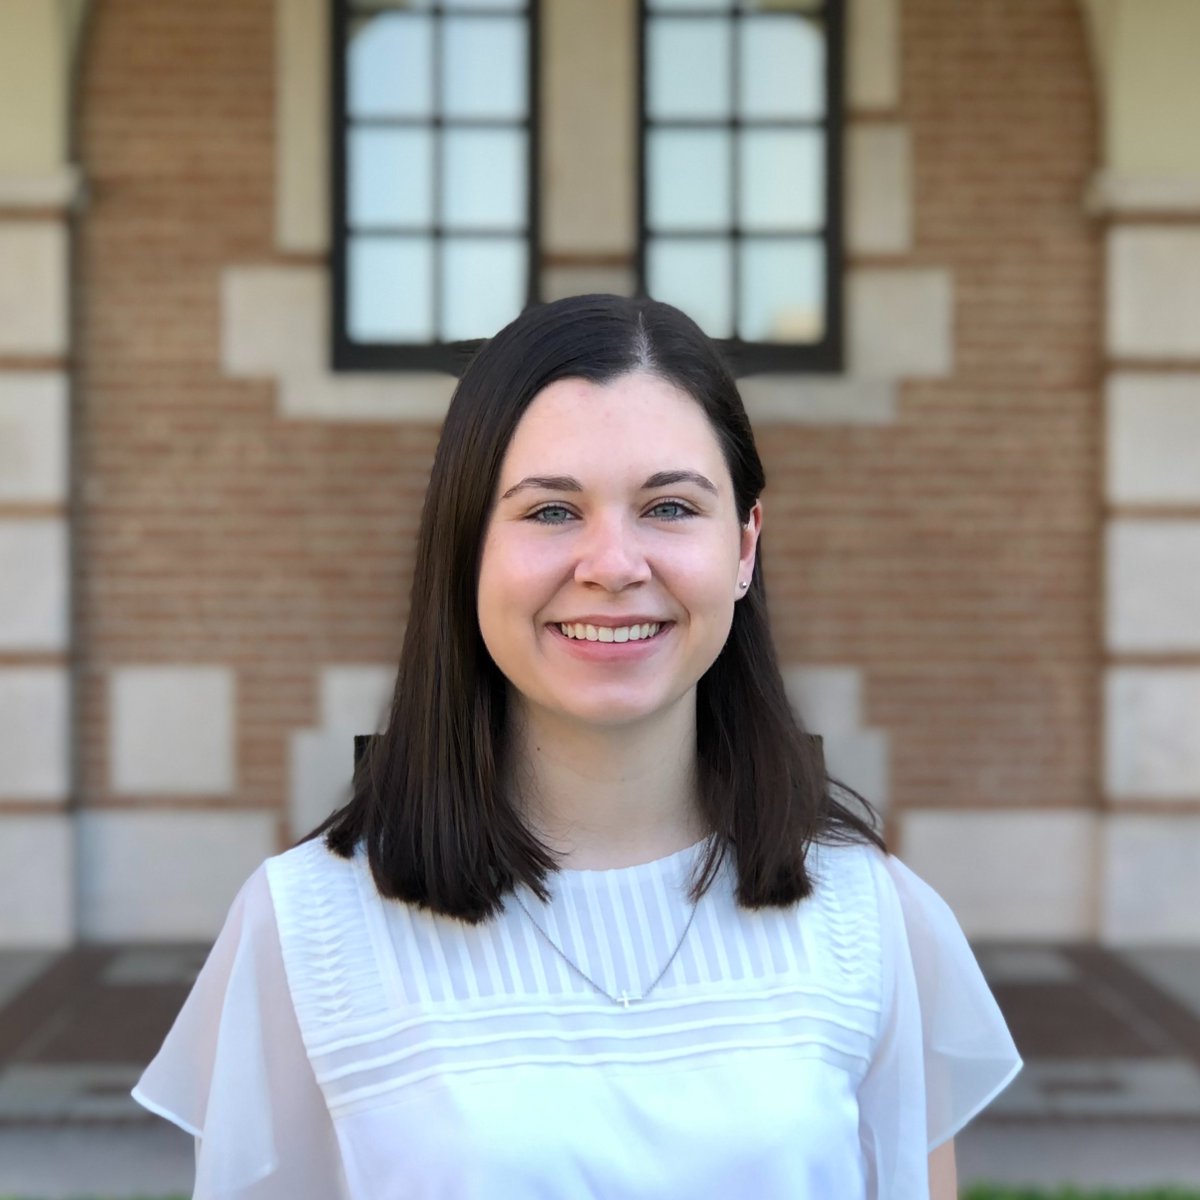 Congratulations to Shannon McGill who is graduating from Bioengineering with a minor in GLHT. She collaborated on the Pediatric Instructional Pelvic Examination Resource (PIPER) and pH Perfect, a project on nasogastric tube verification in preterm infants. Congrats, Shannon!🎓